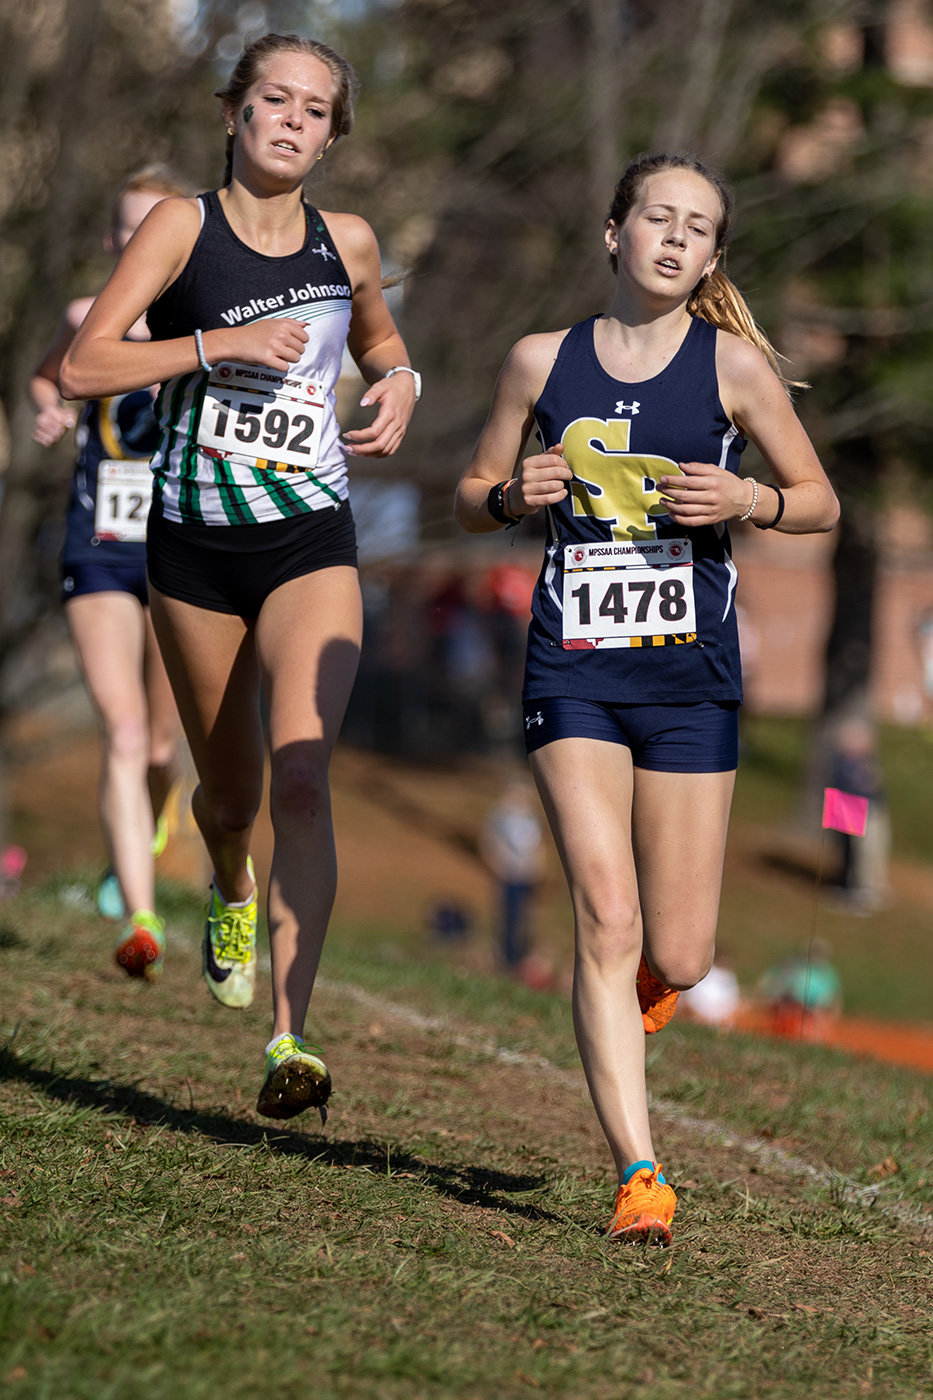 The Severna Park girls overcame the odds and won their first state title since 2018 on November 12 behind the performances of senior county champion Cameron Glebocki, freshman Kathryn Murphy and sophomore Rebecca Jimeno.